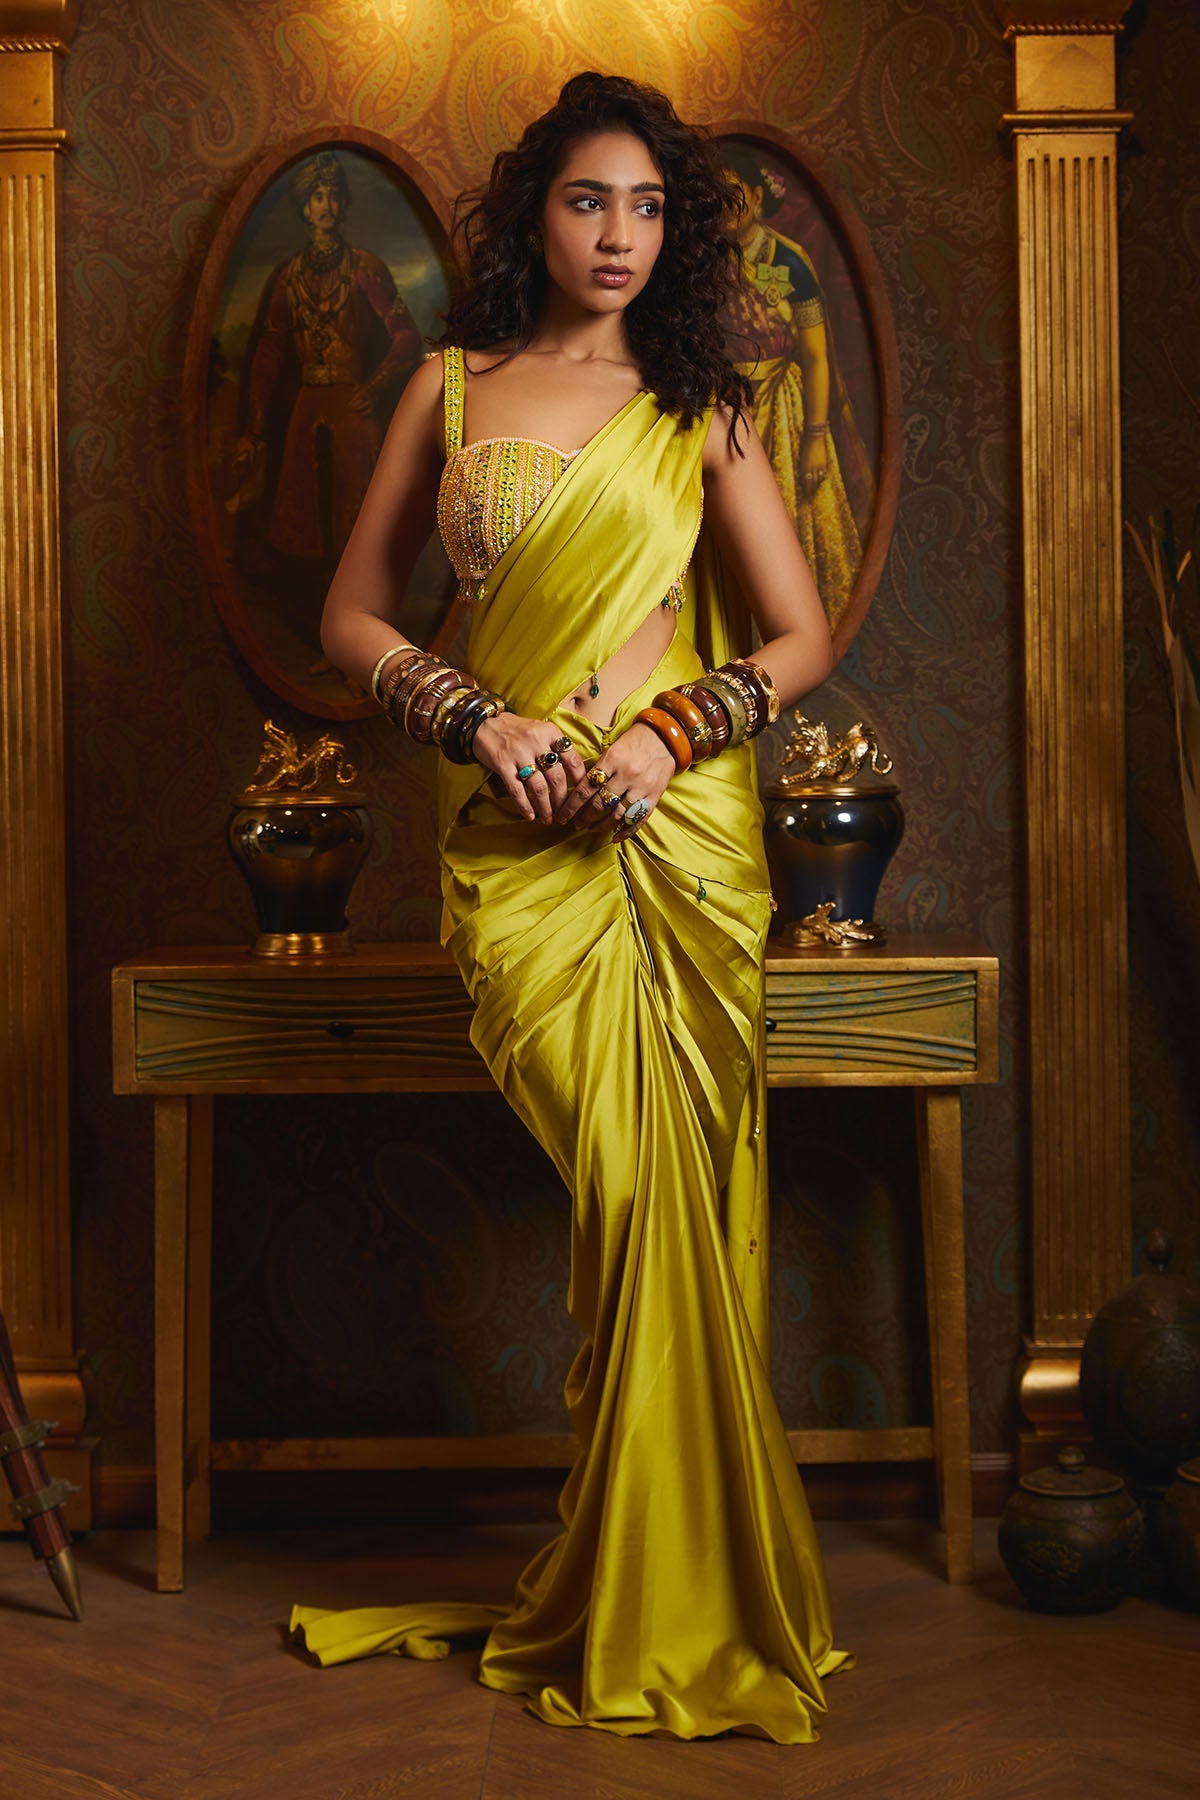 Multicolour Embroidered Lime Yellow Skirt Saree Set